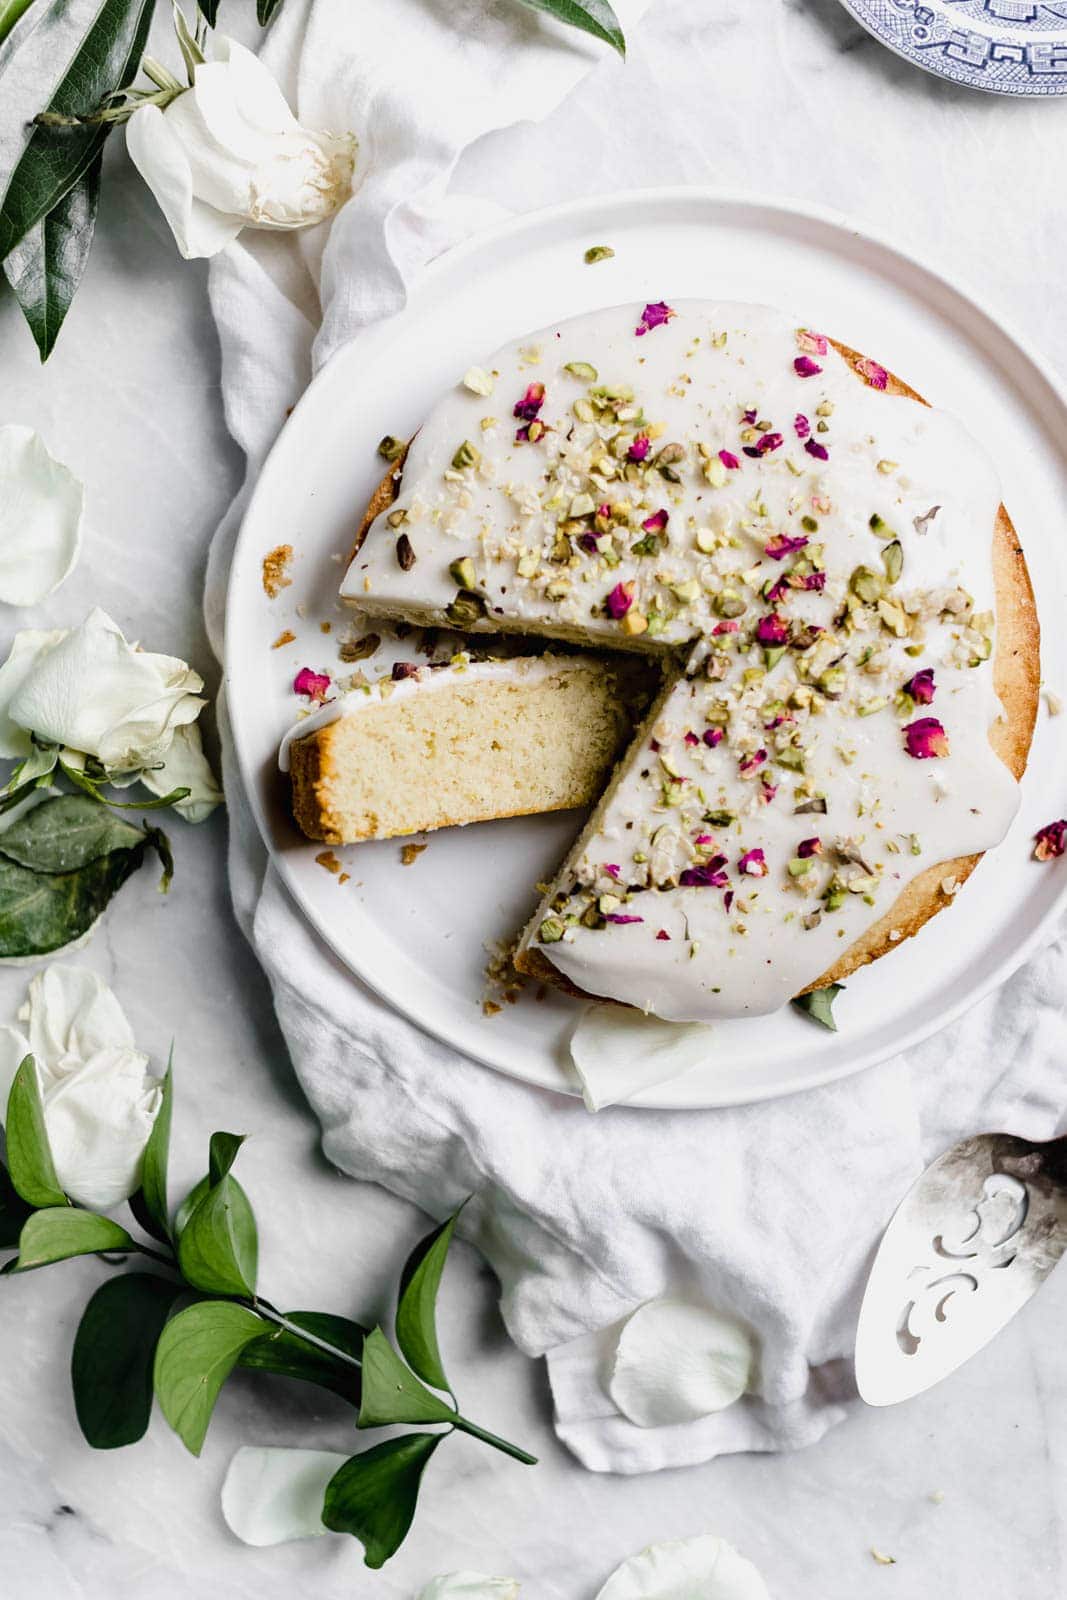 rose cake topped with glaze and pistachios 